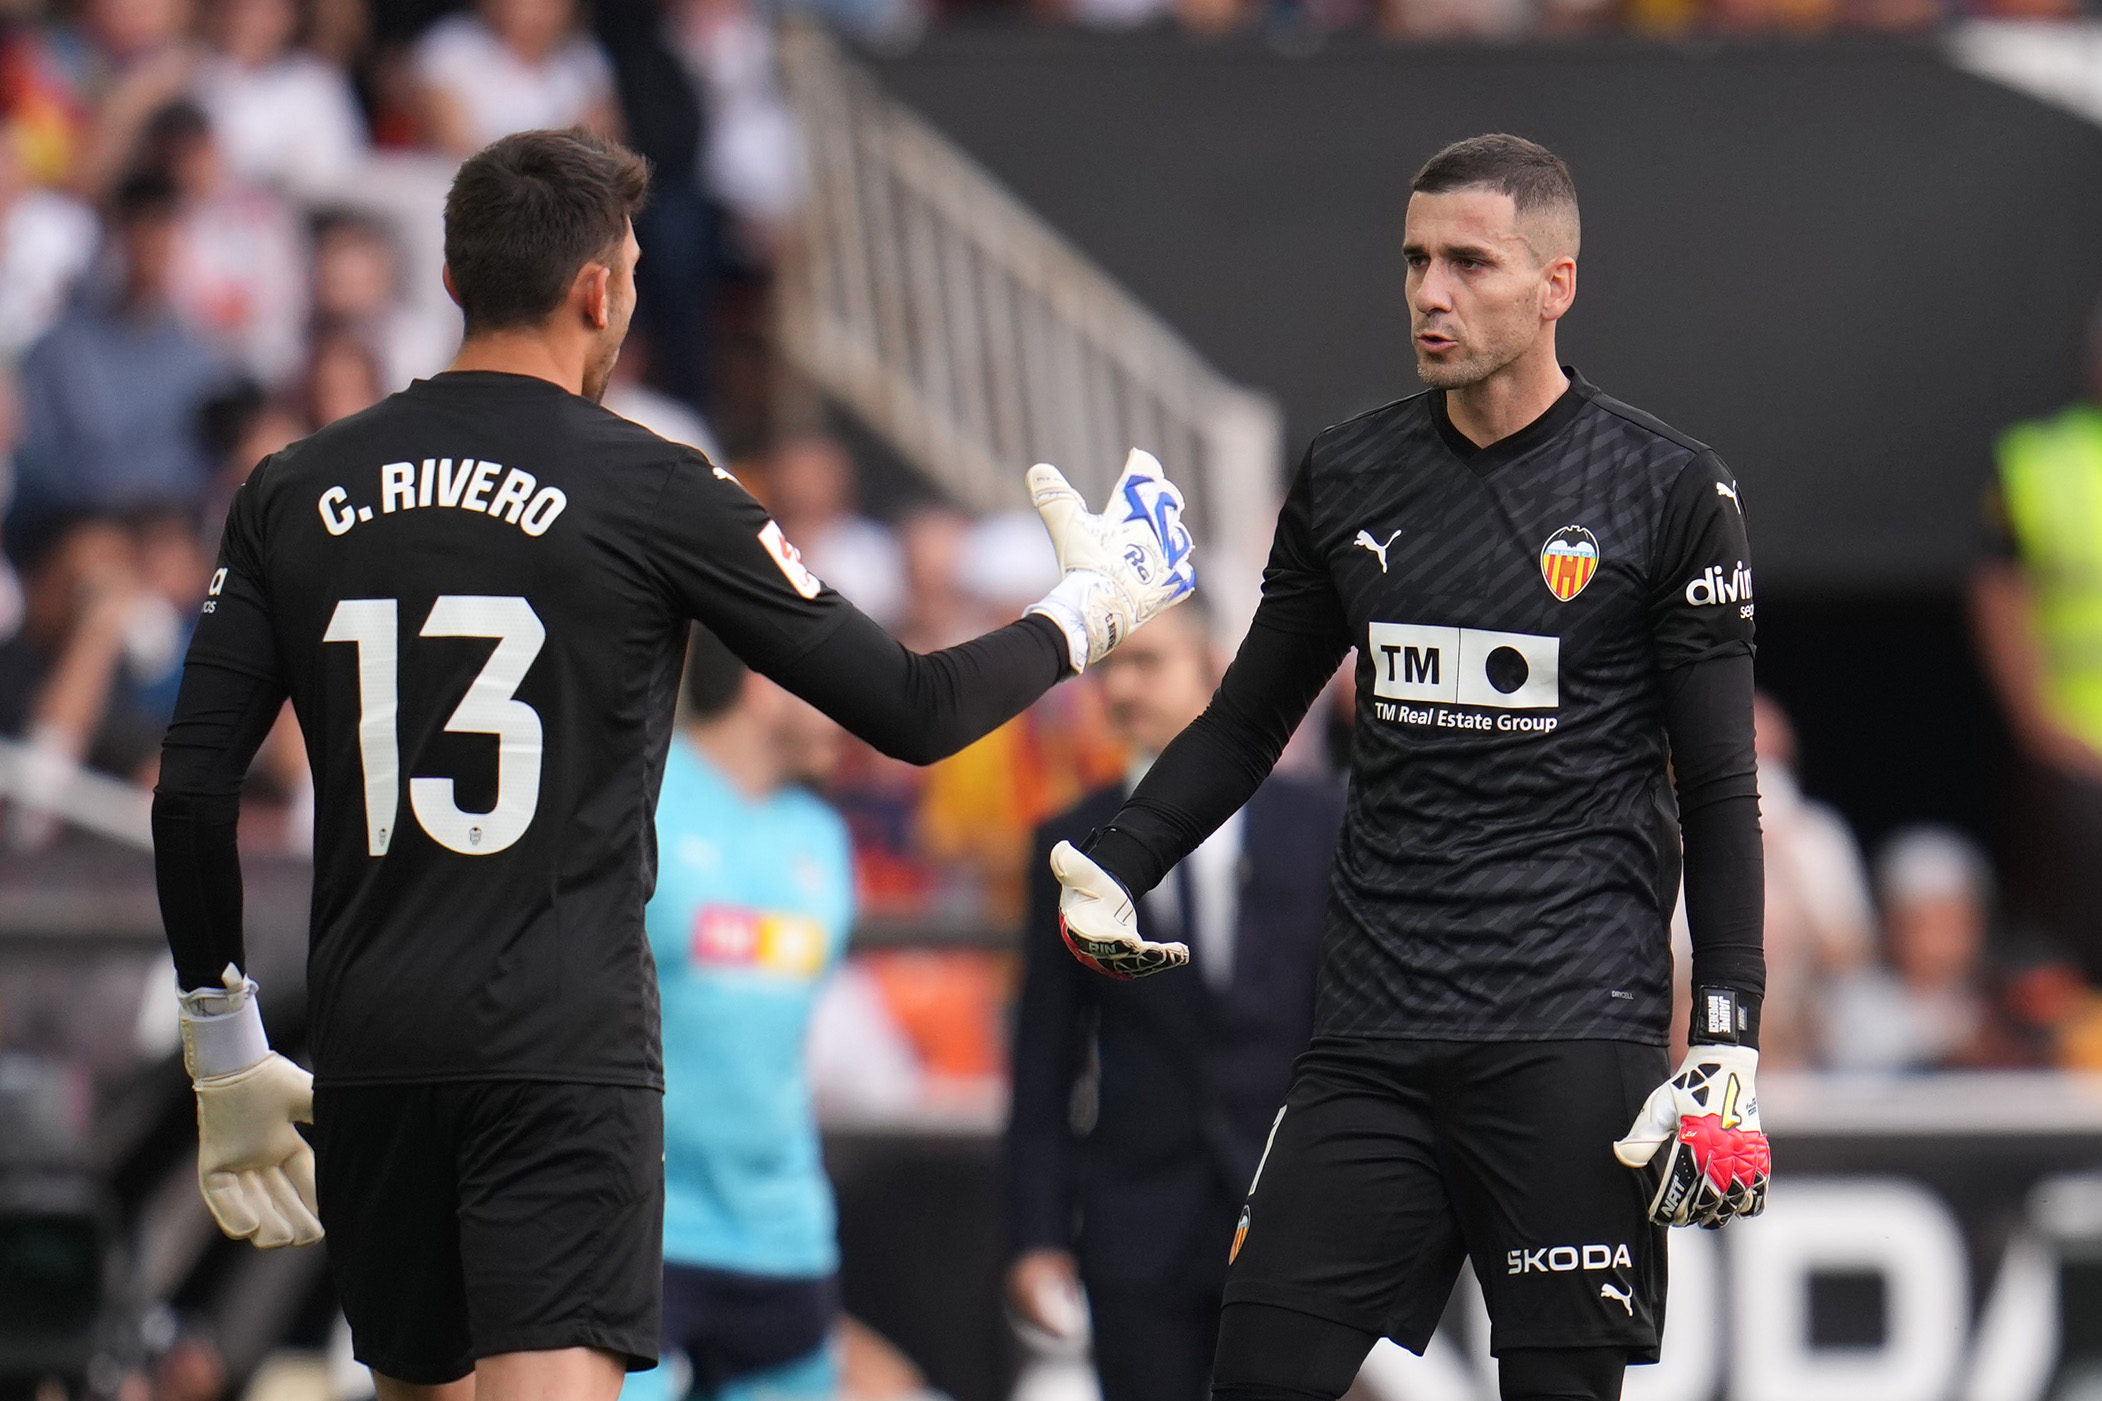 Valencia goalkeeper out for 4-5 months after suffering serious injury in first La Liga start in two years